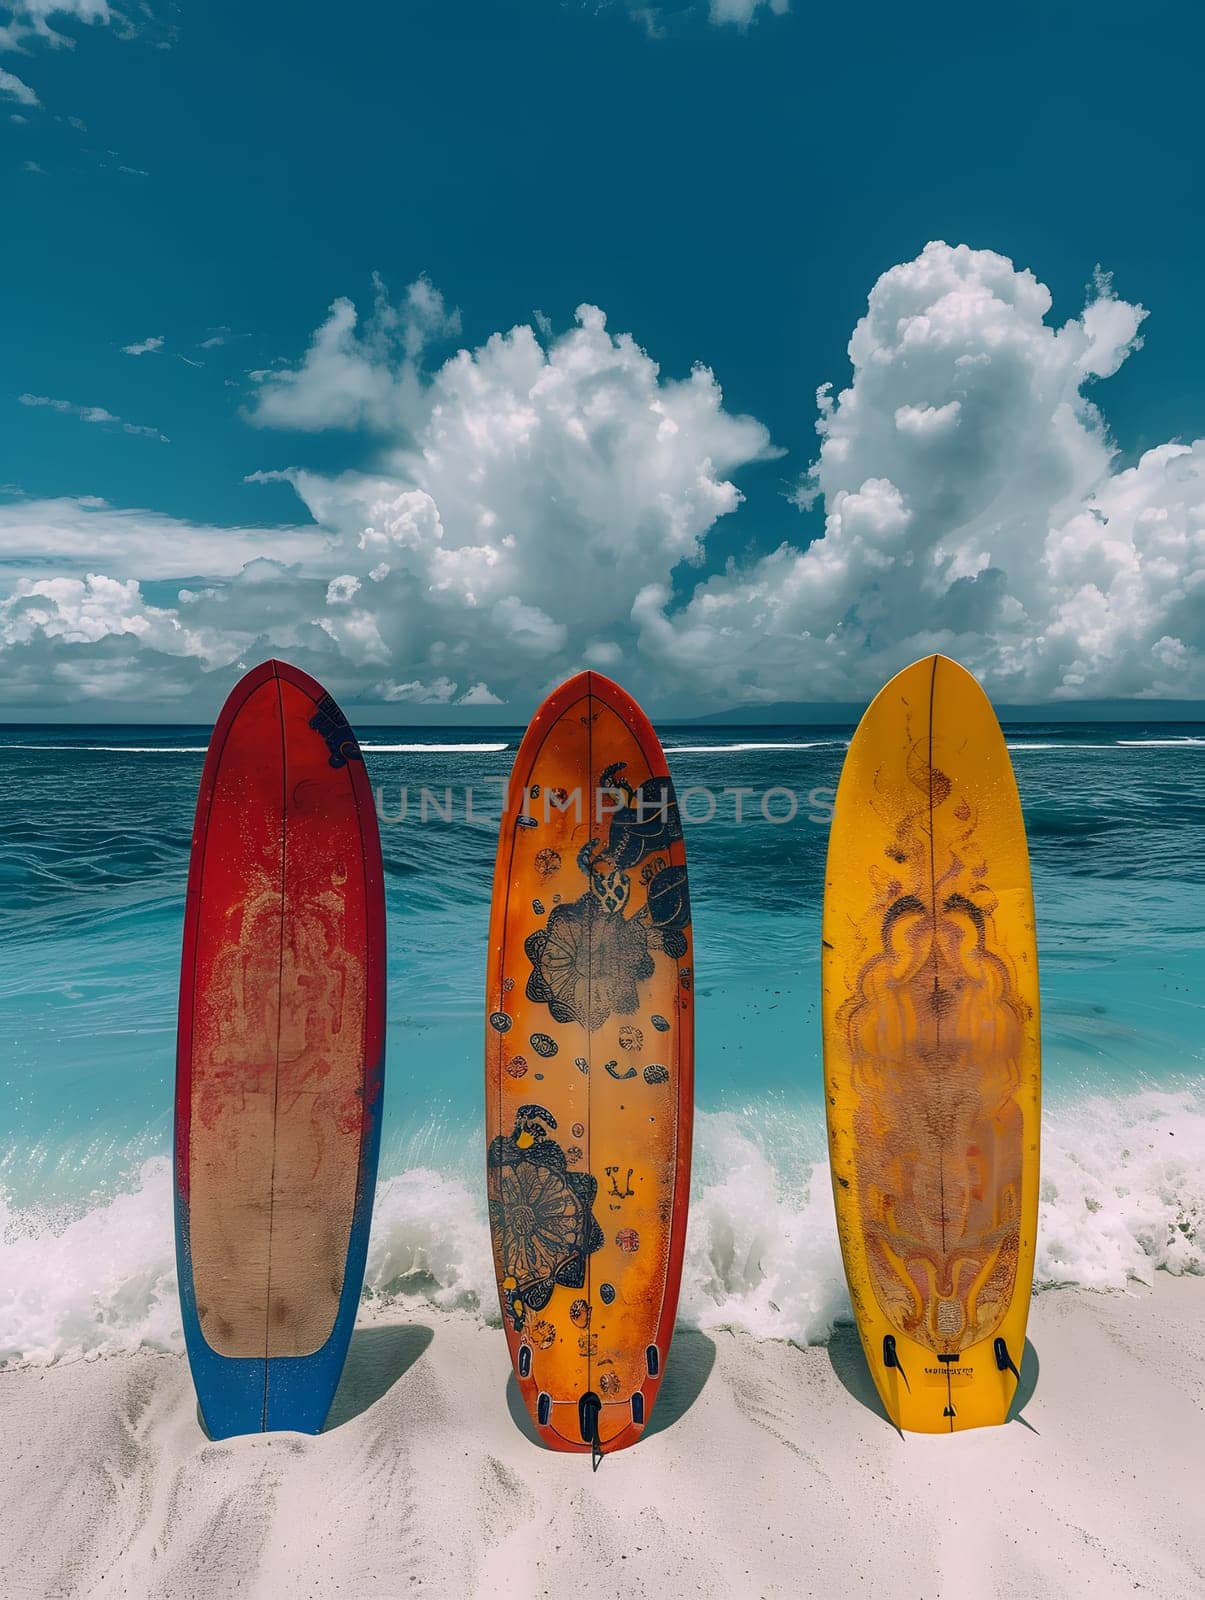 Three surfboards made of wood are placed in a row on the sandy beach, overlooking the ocean. The landscape is painted in varying tints and shades, with the horizon blending into the sky and clouds